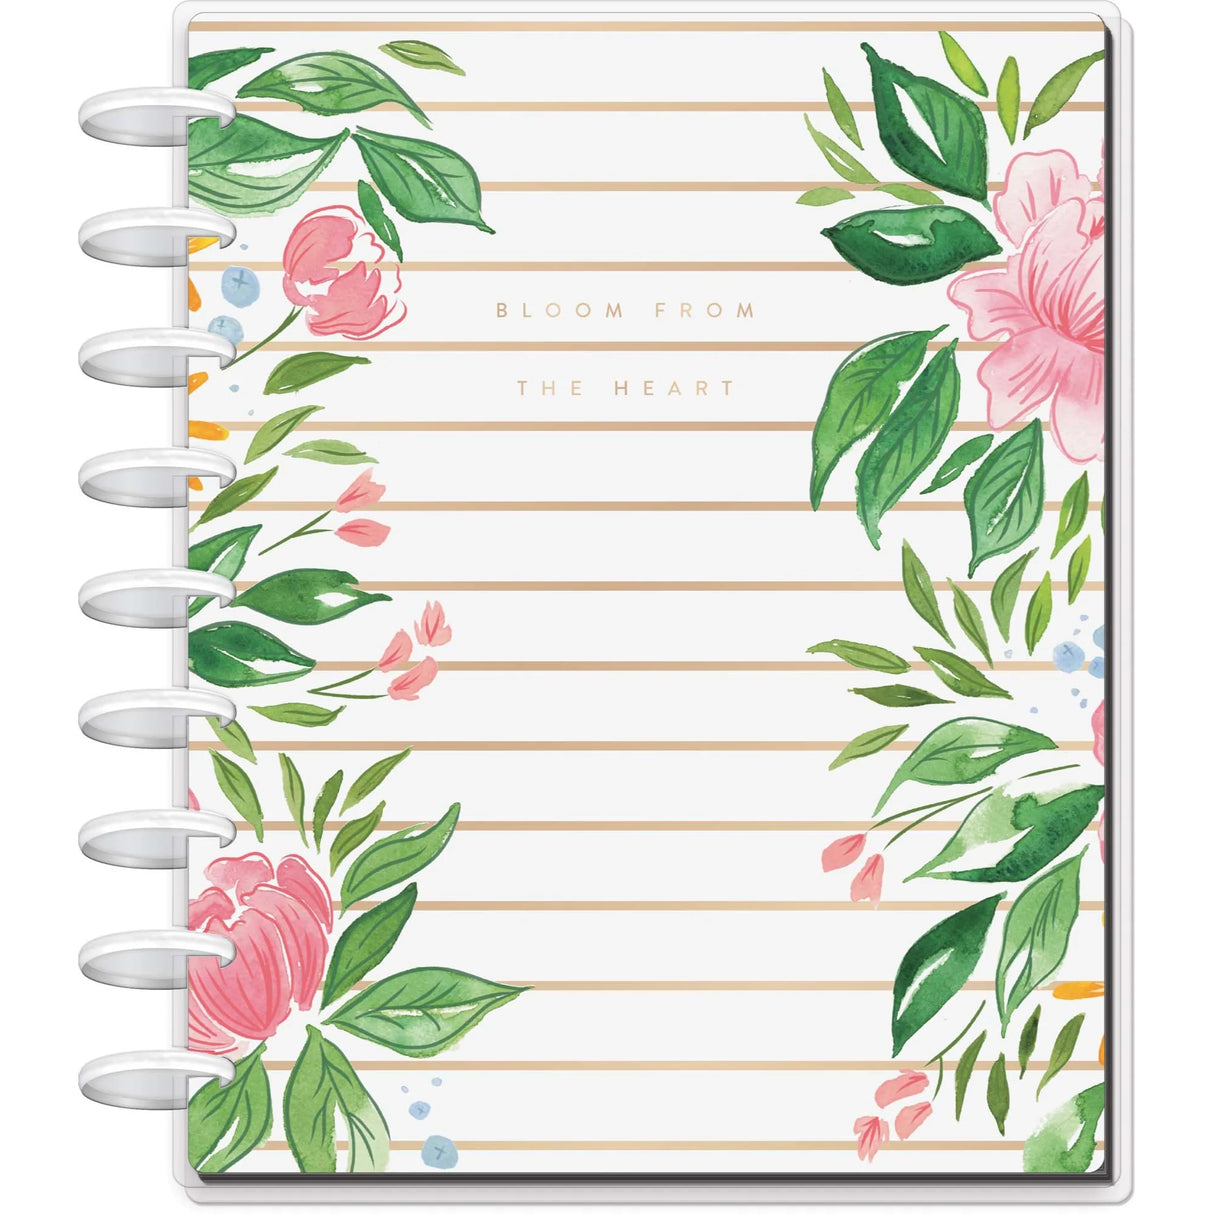 Happy Planner Watercolour Florals CLASSIC Monthly Plans & Notes Journal